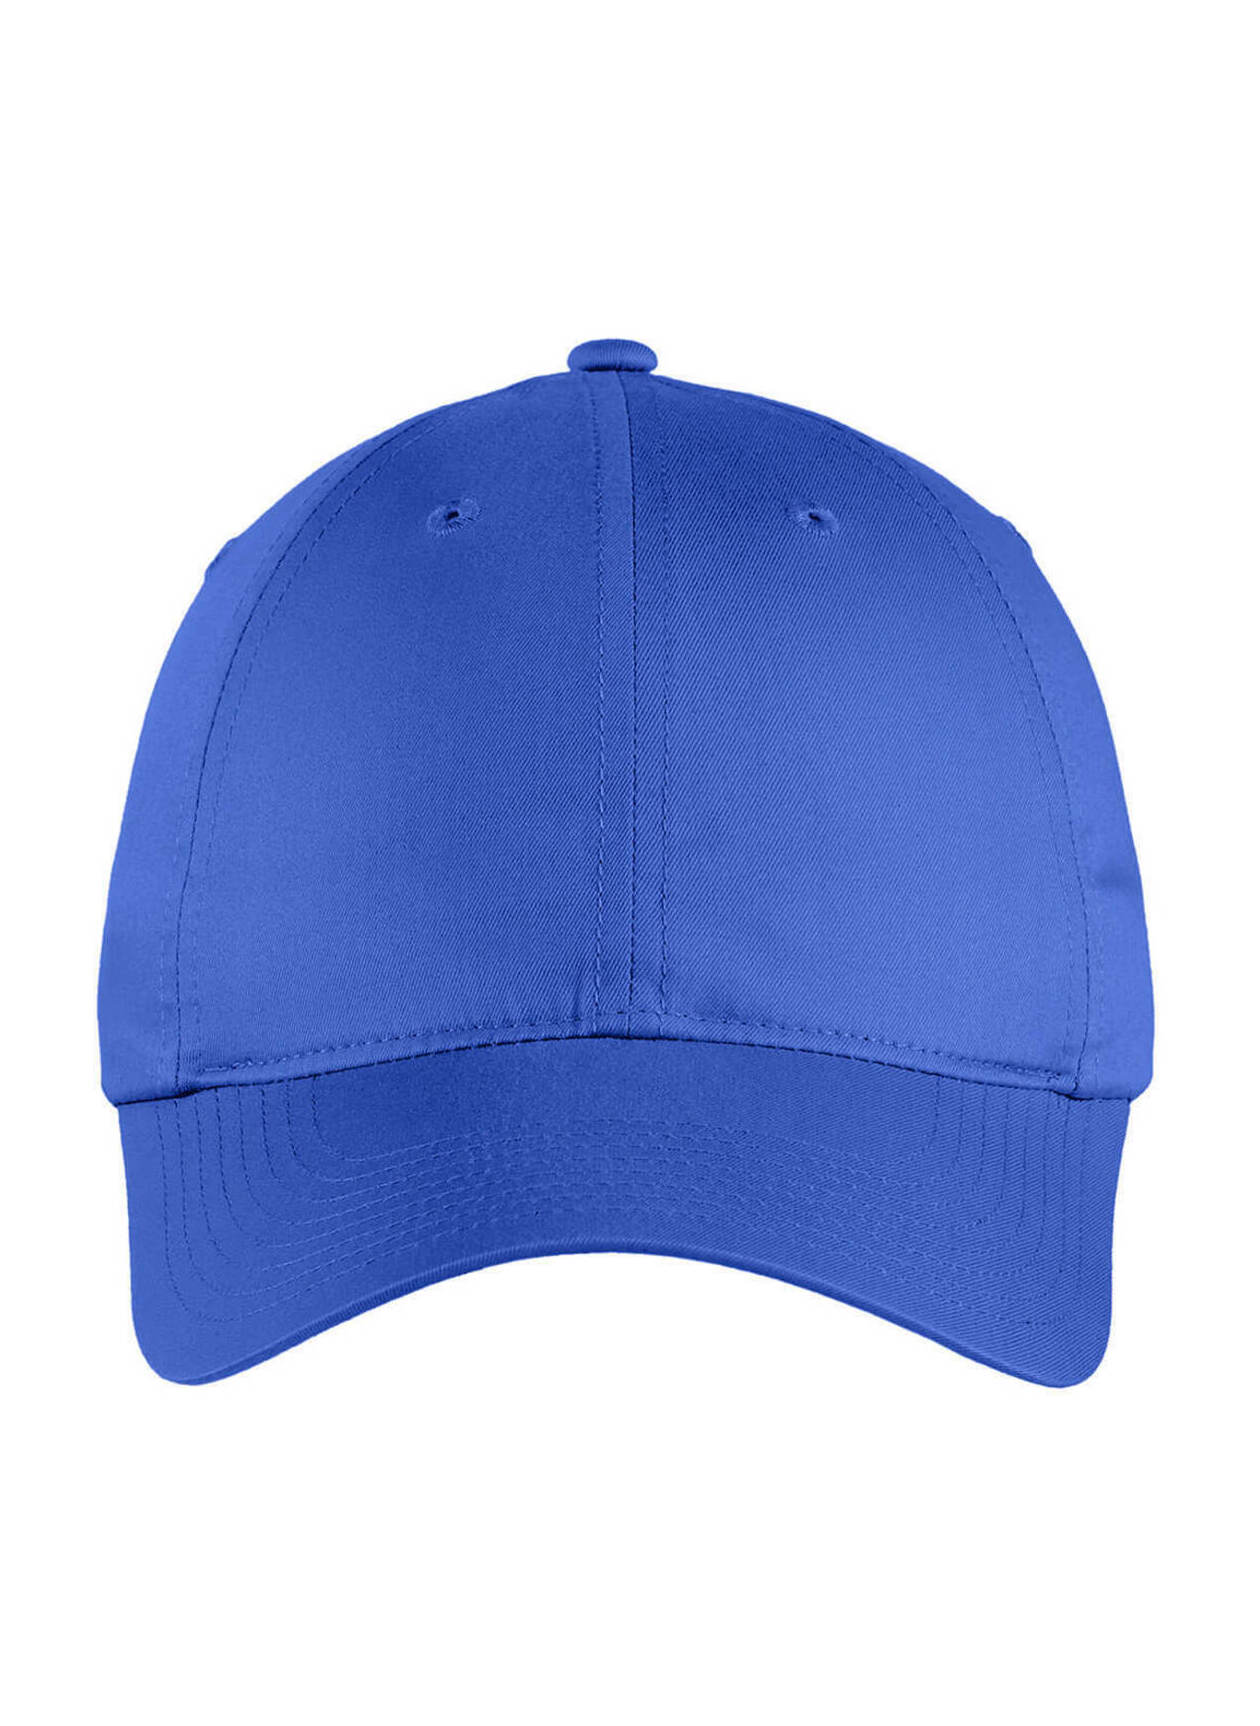 Nike Game Royal Unstructured Twill Hat